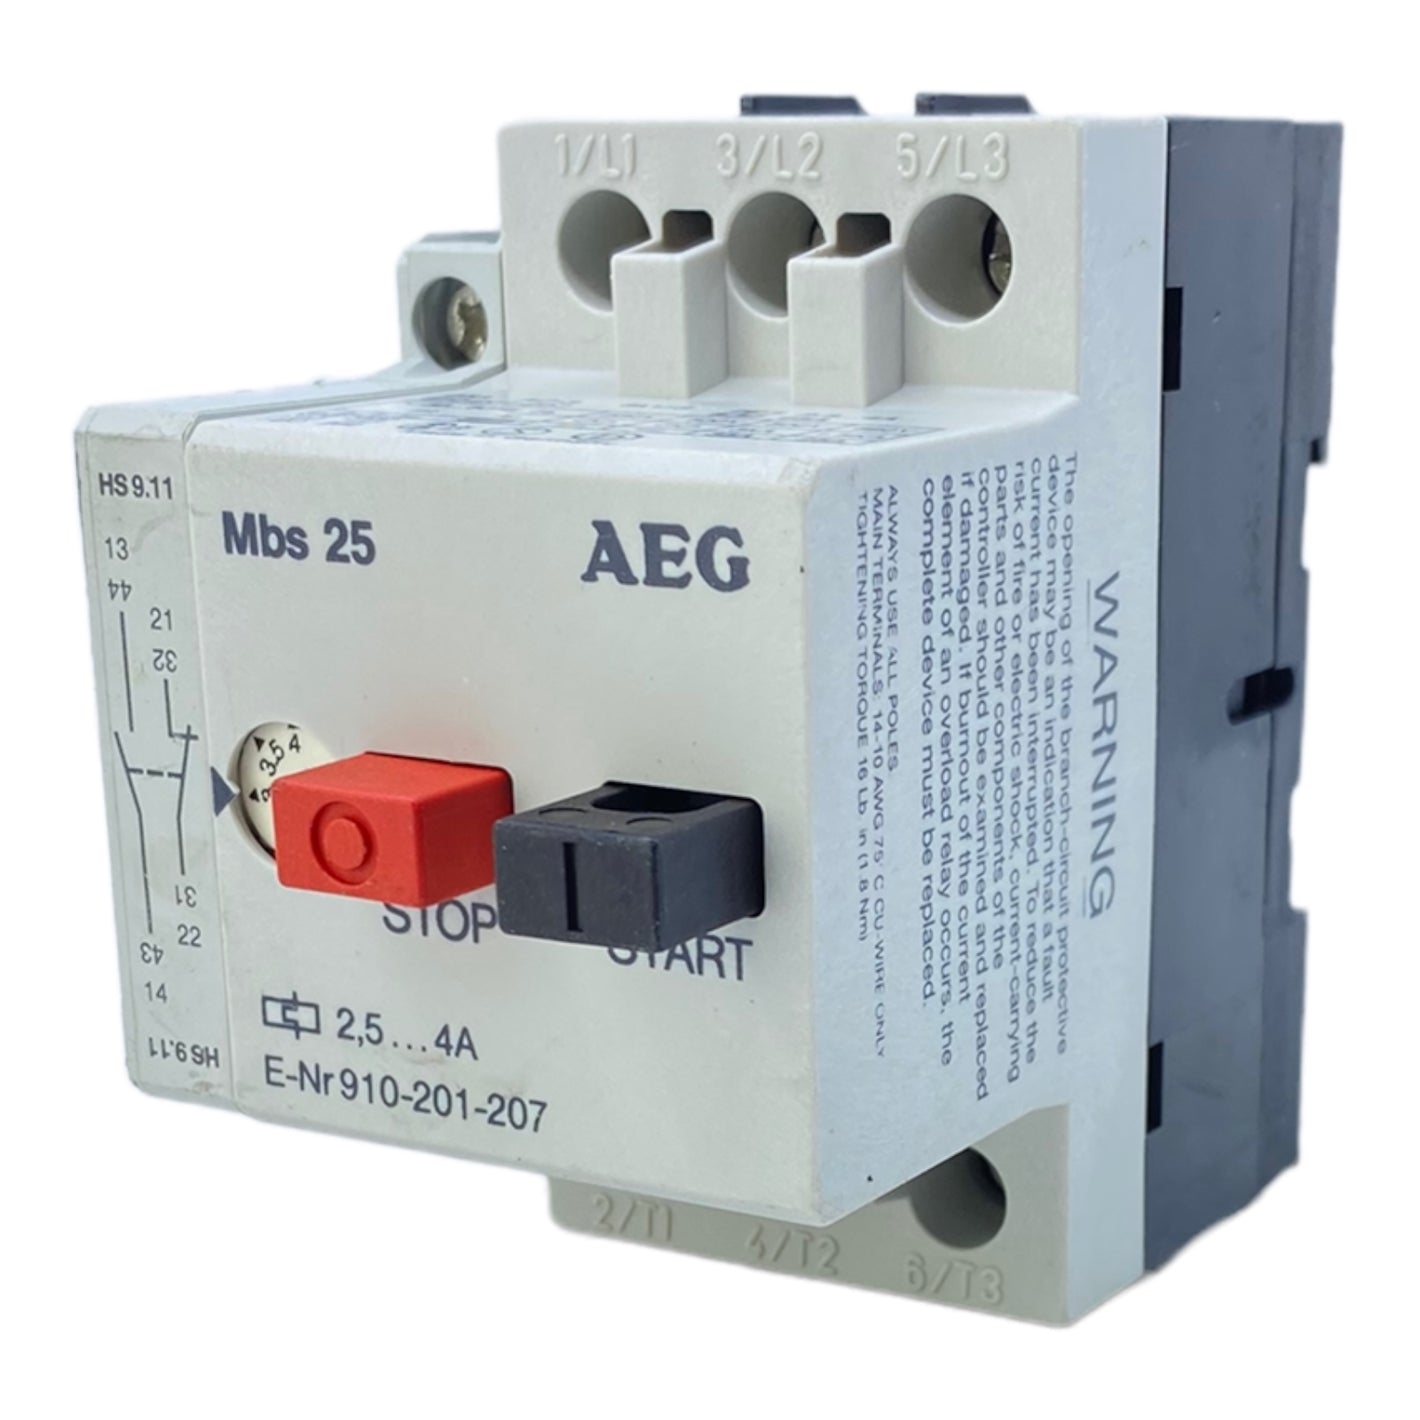 AEG MBS25 910-201-207 motor protection switch 